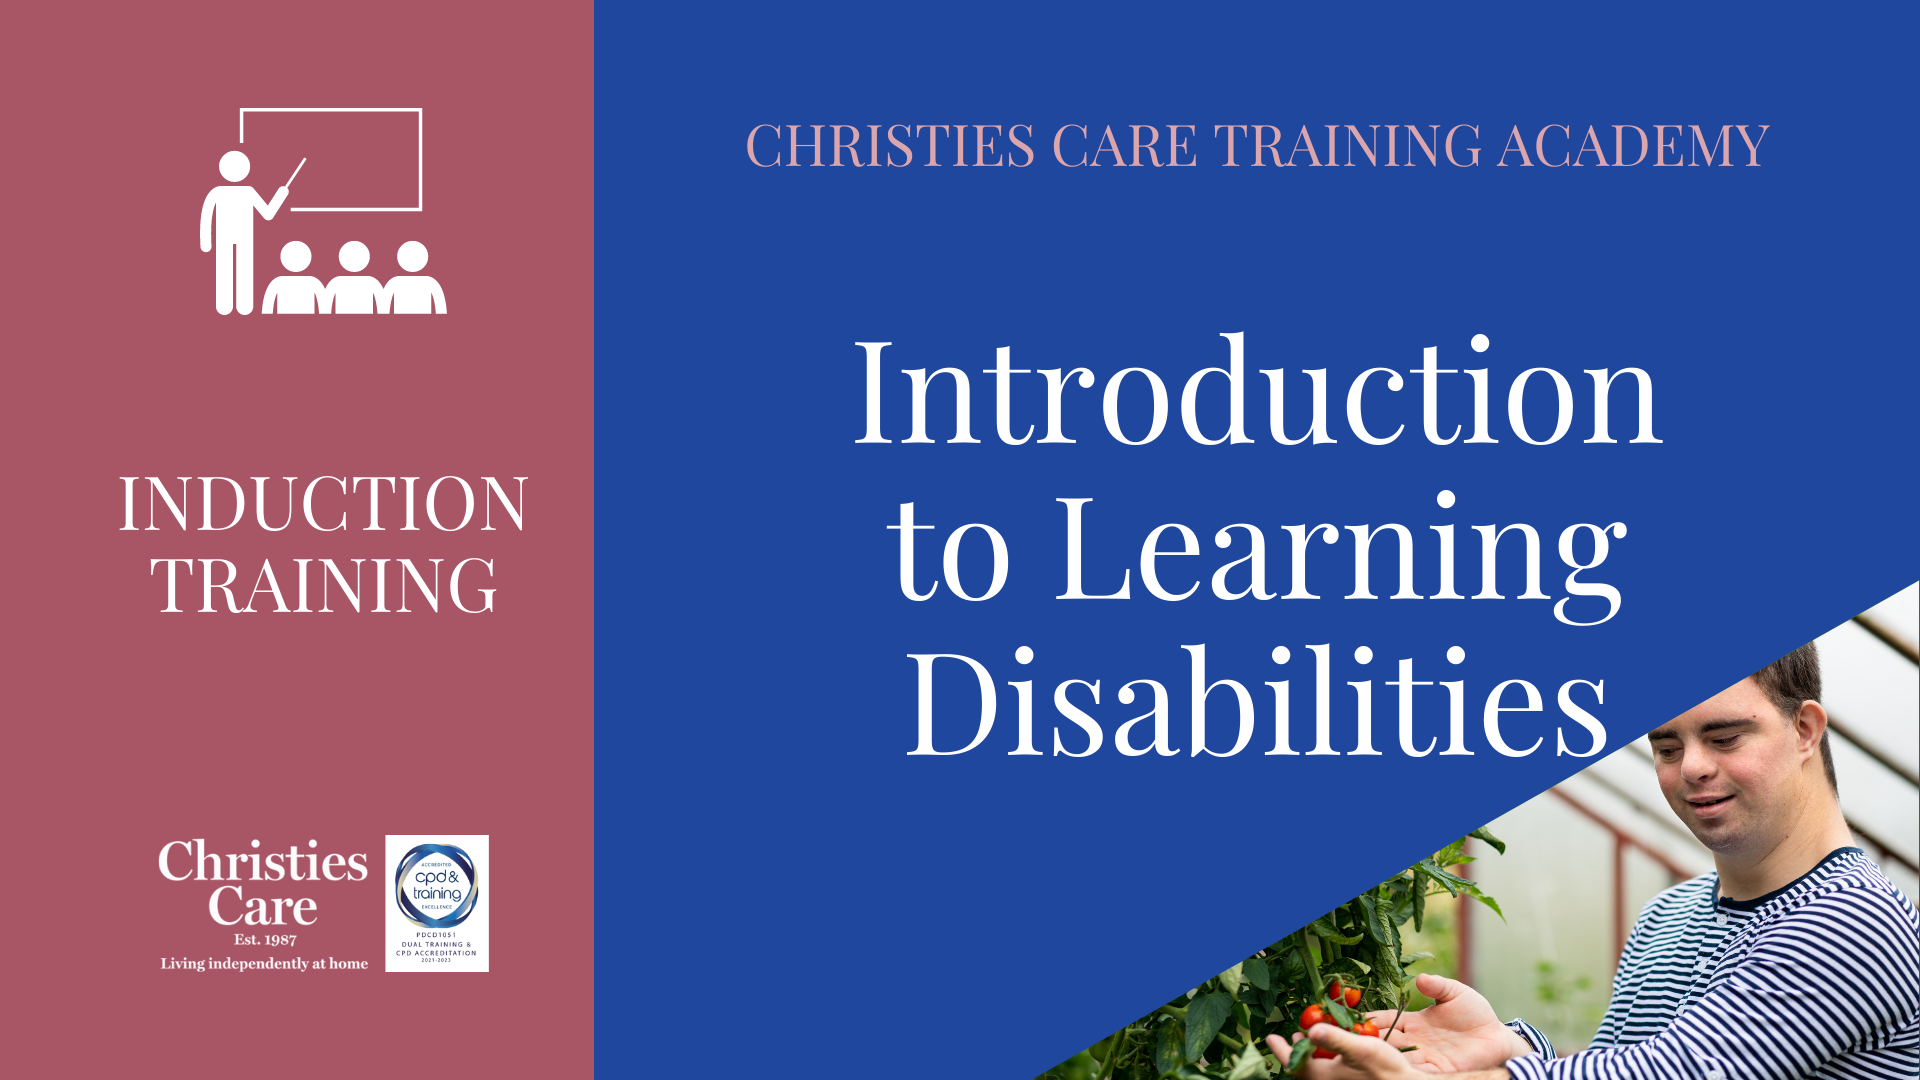 INTRODUCTION TO LEARNING DISABILITIES  TR020